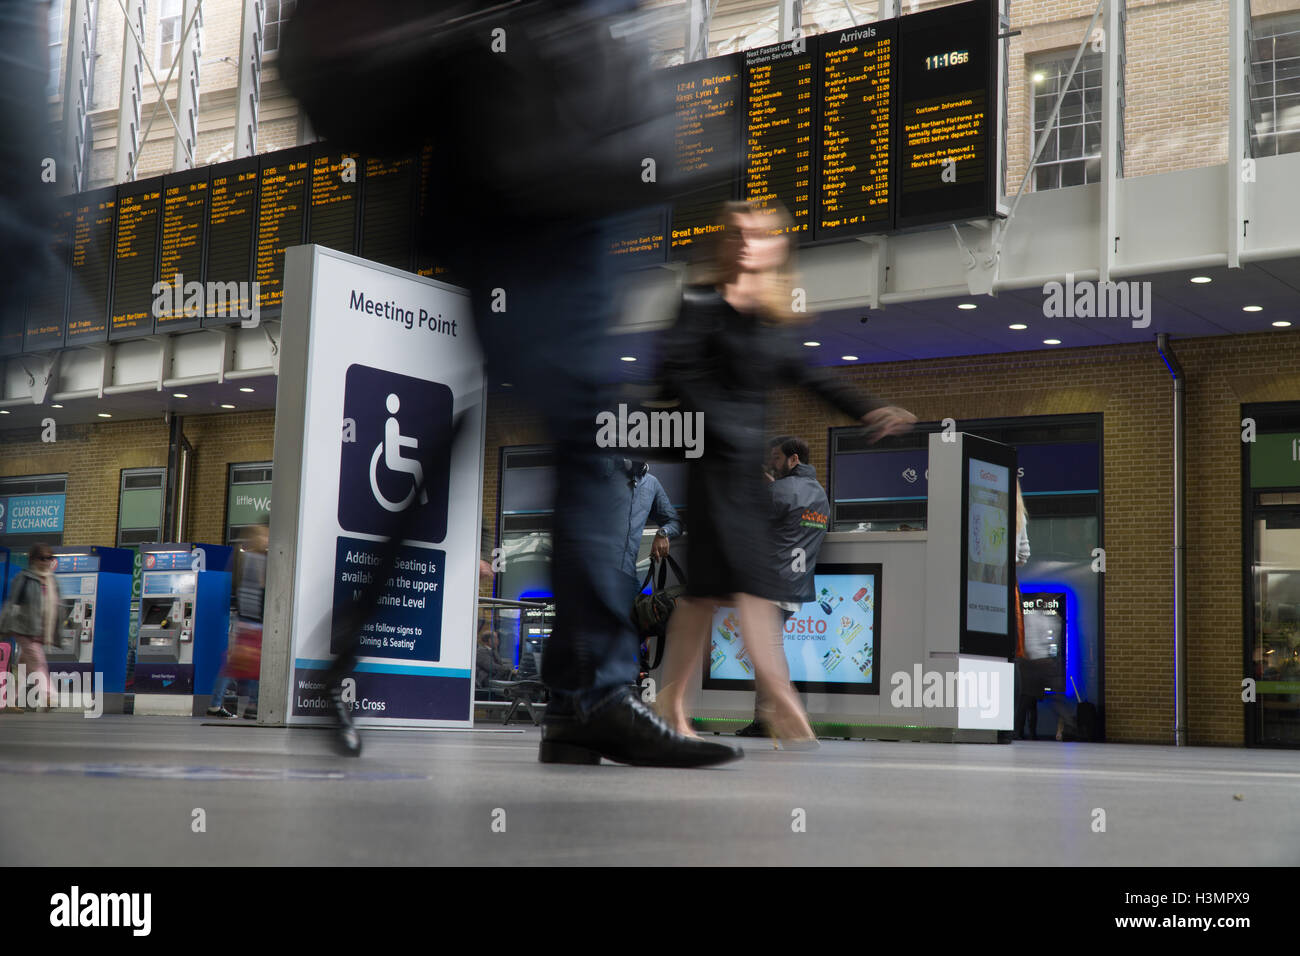 Slow shutter speed used to record exaggerated movement of People in Kings Cross St Pancreas Station,London,U.K. Stock Photo